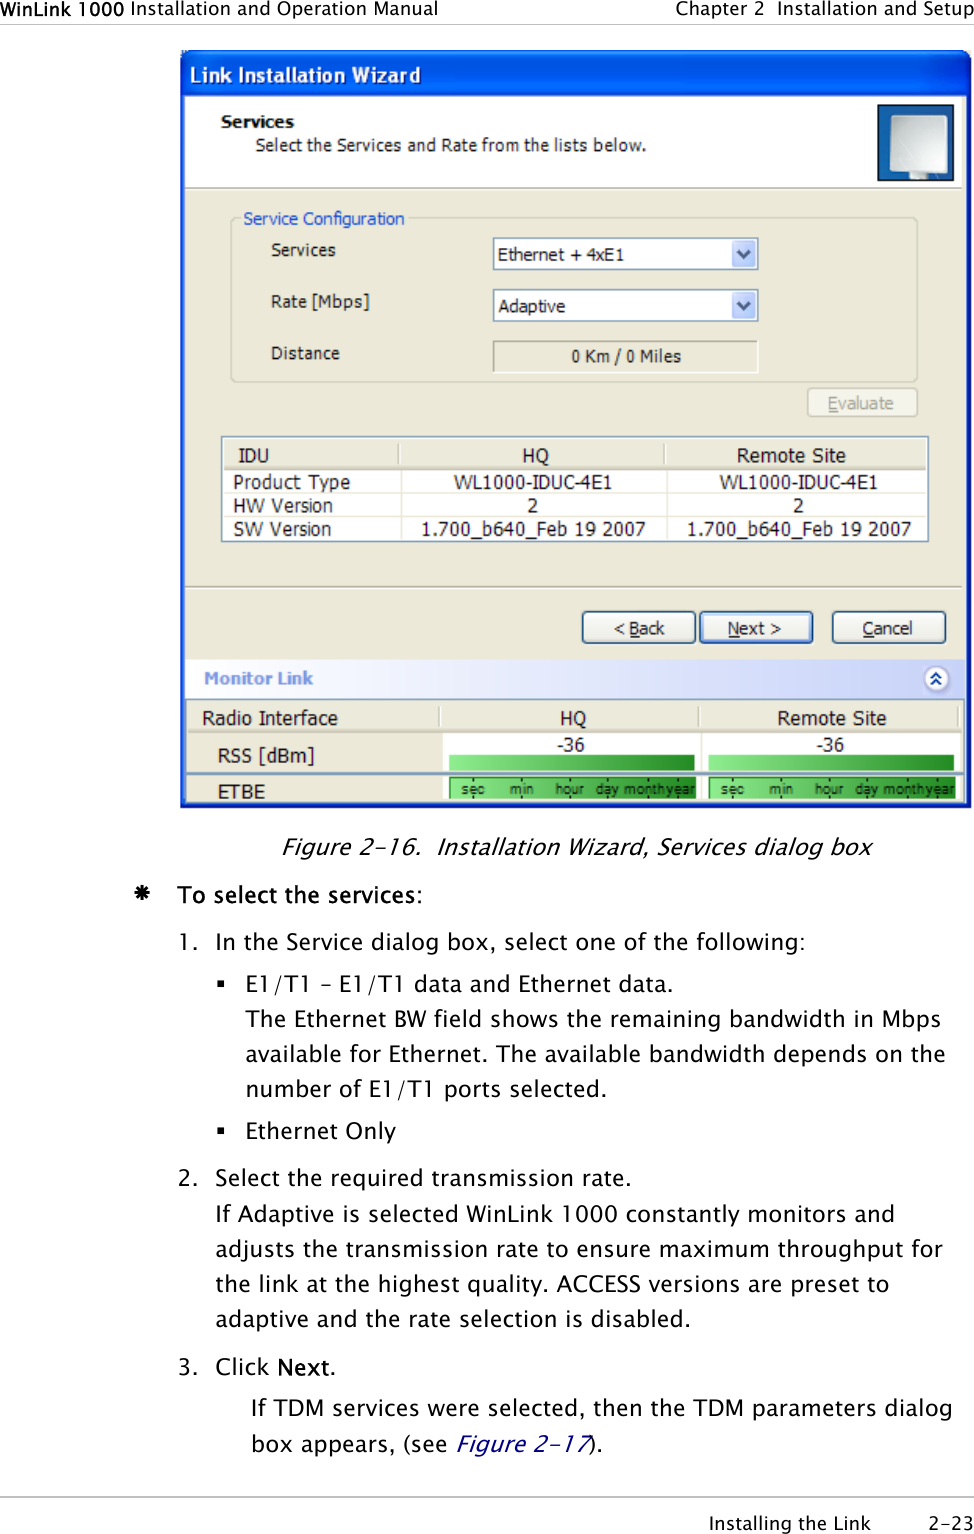 WinLink 1000 Installation and Operation Manual  Chapter  2  Installation and Setup  Figure  2-16.  Installation Wizard, Services dialog box Æ To select the services: 1. In the Service dialog box, select one of the following:  E1/T1 – E1/T1 data and Ethernet data. The Ethernet BW field shows the remaining bandwidth in Mbps available for Ethernet. The available bandwidth depends on the number of E1/T1 ports selected.  Ethernet Only 2. Select the required transmission rate. If Adaptive is selected WinLink 1000 constantly monitors and adjusts the transmission rate to ensure maximum throughput for the link at the highest quality. ACCESS versions are preset to adaptive and the rate selection is disabled. 3. Click Next. If TDM services were selected, then the TDM parameters dialog box appears, (see Figure  2-17).  Installing the Link  2-23 